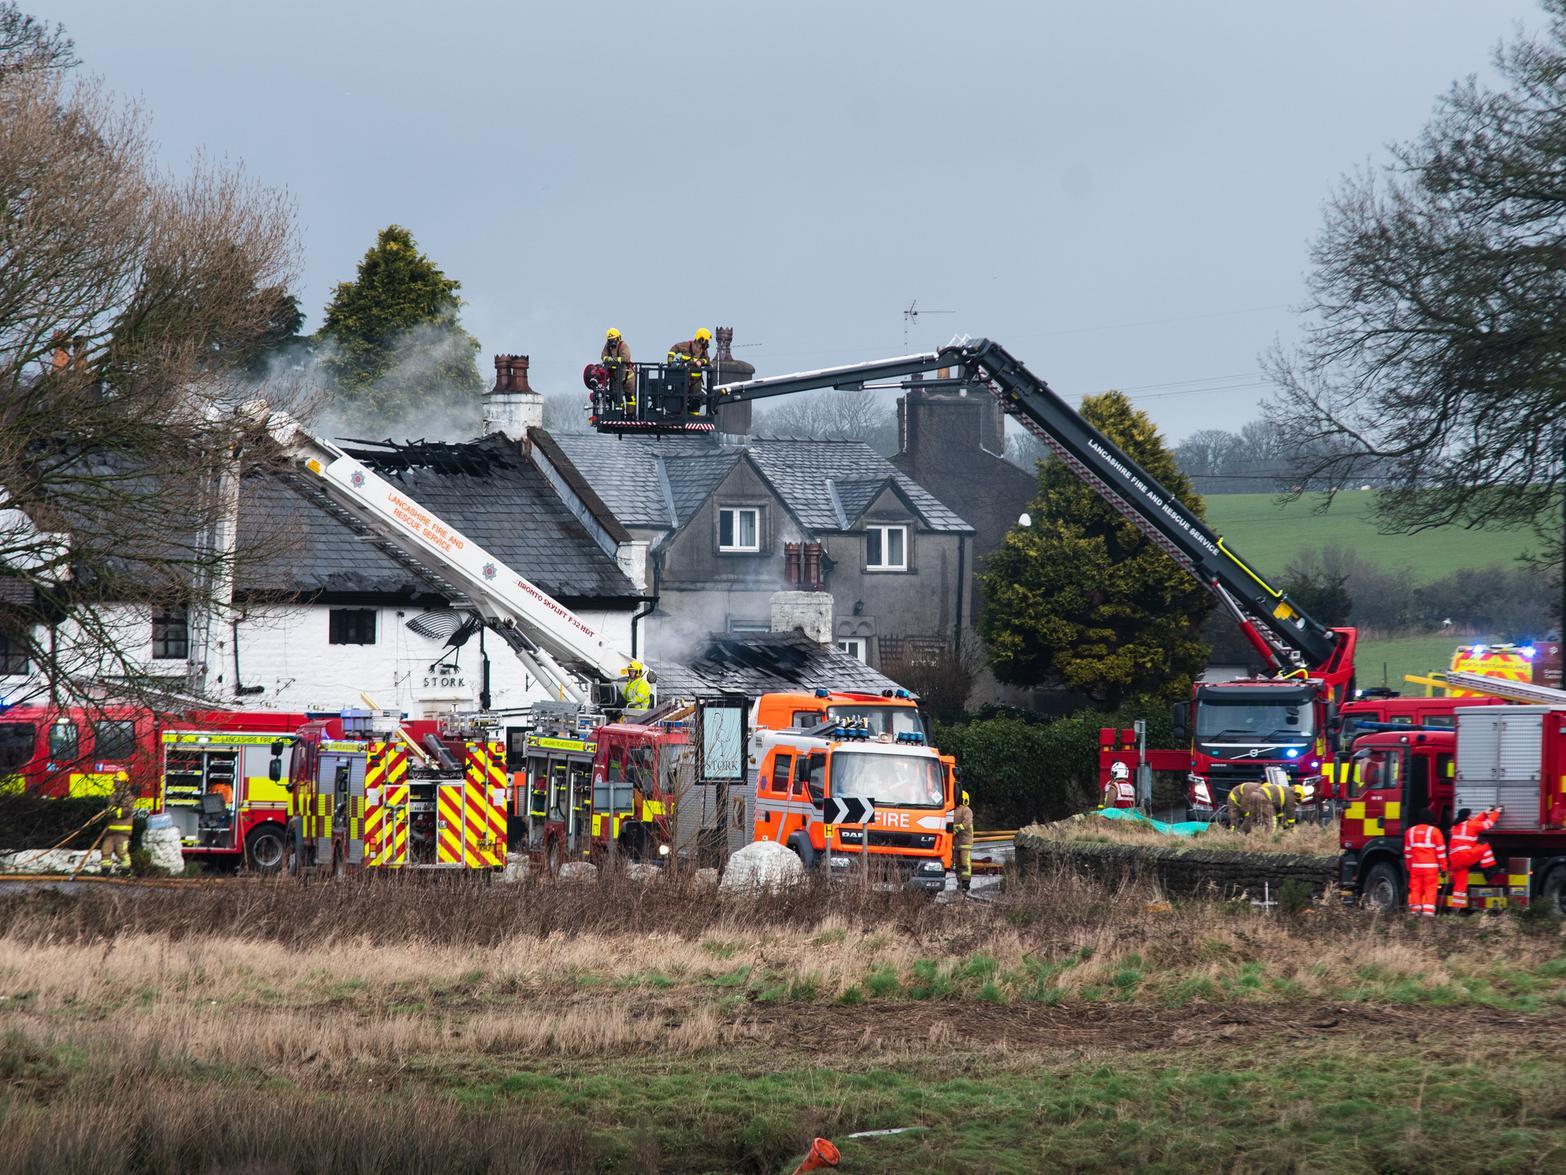 When crews arrived, they described the building as being 'well alight'
Copyright: jpimedia